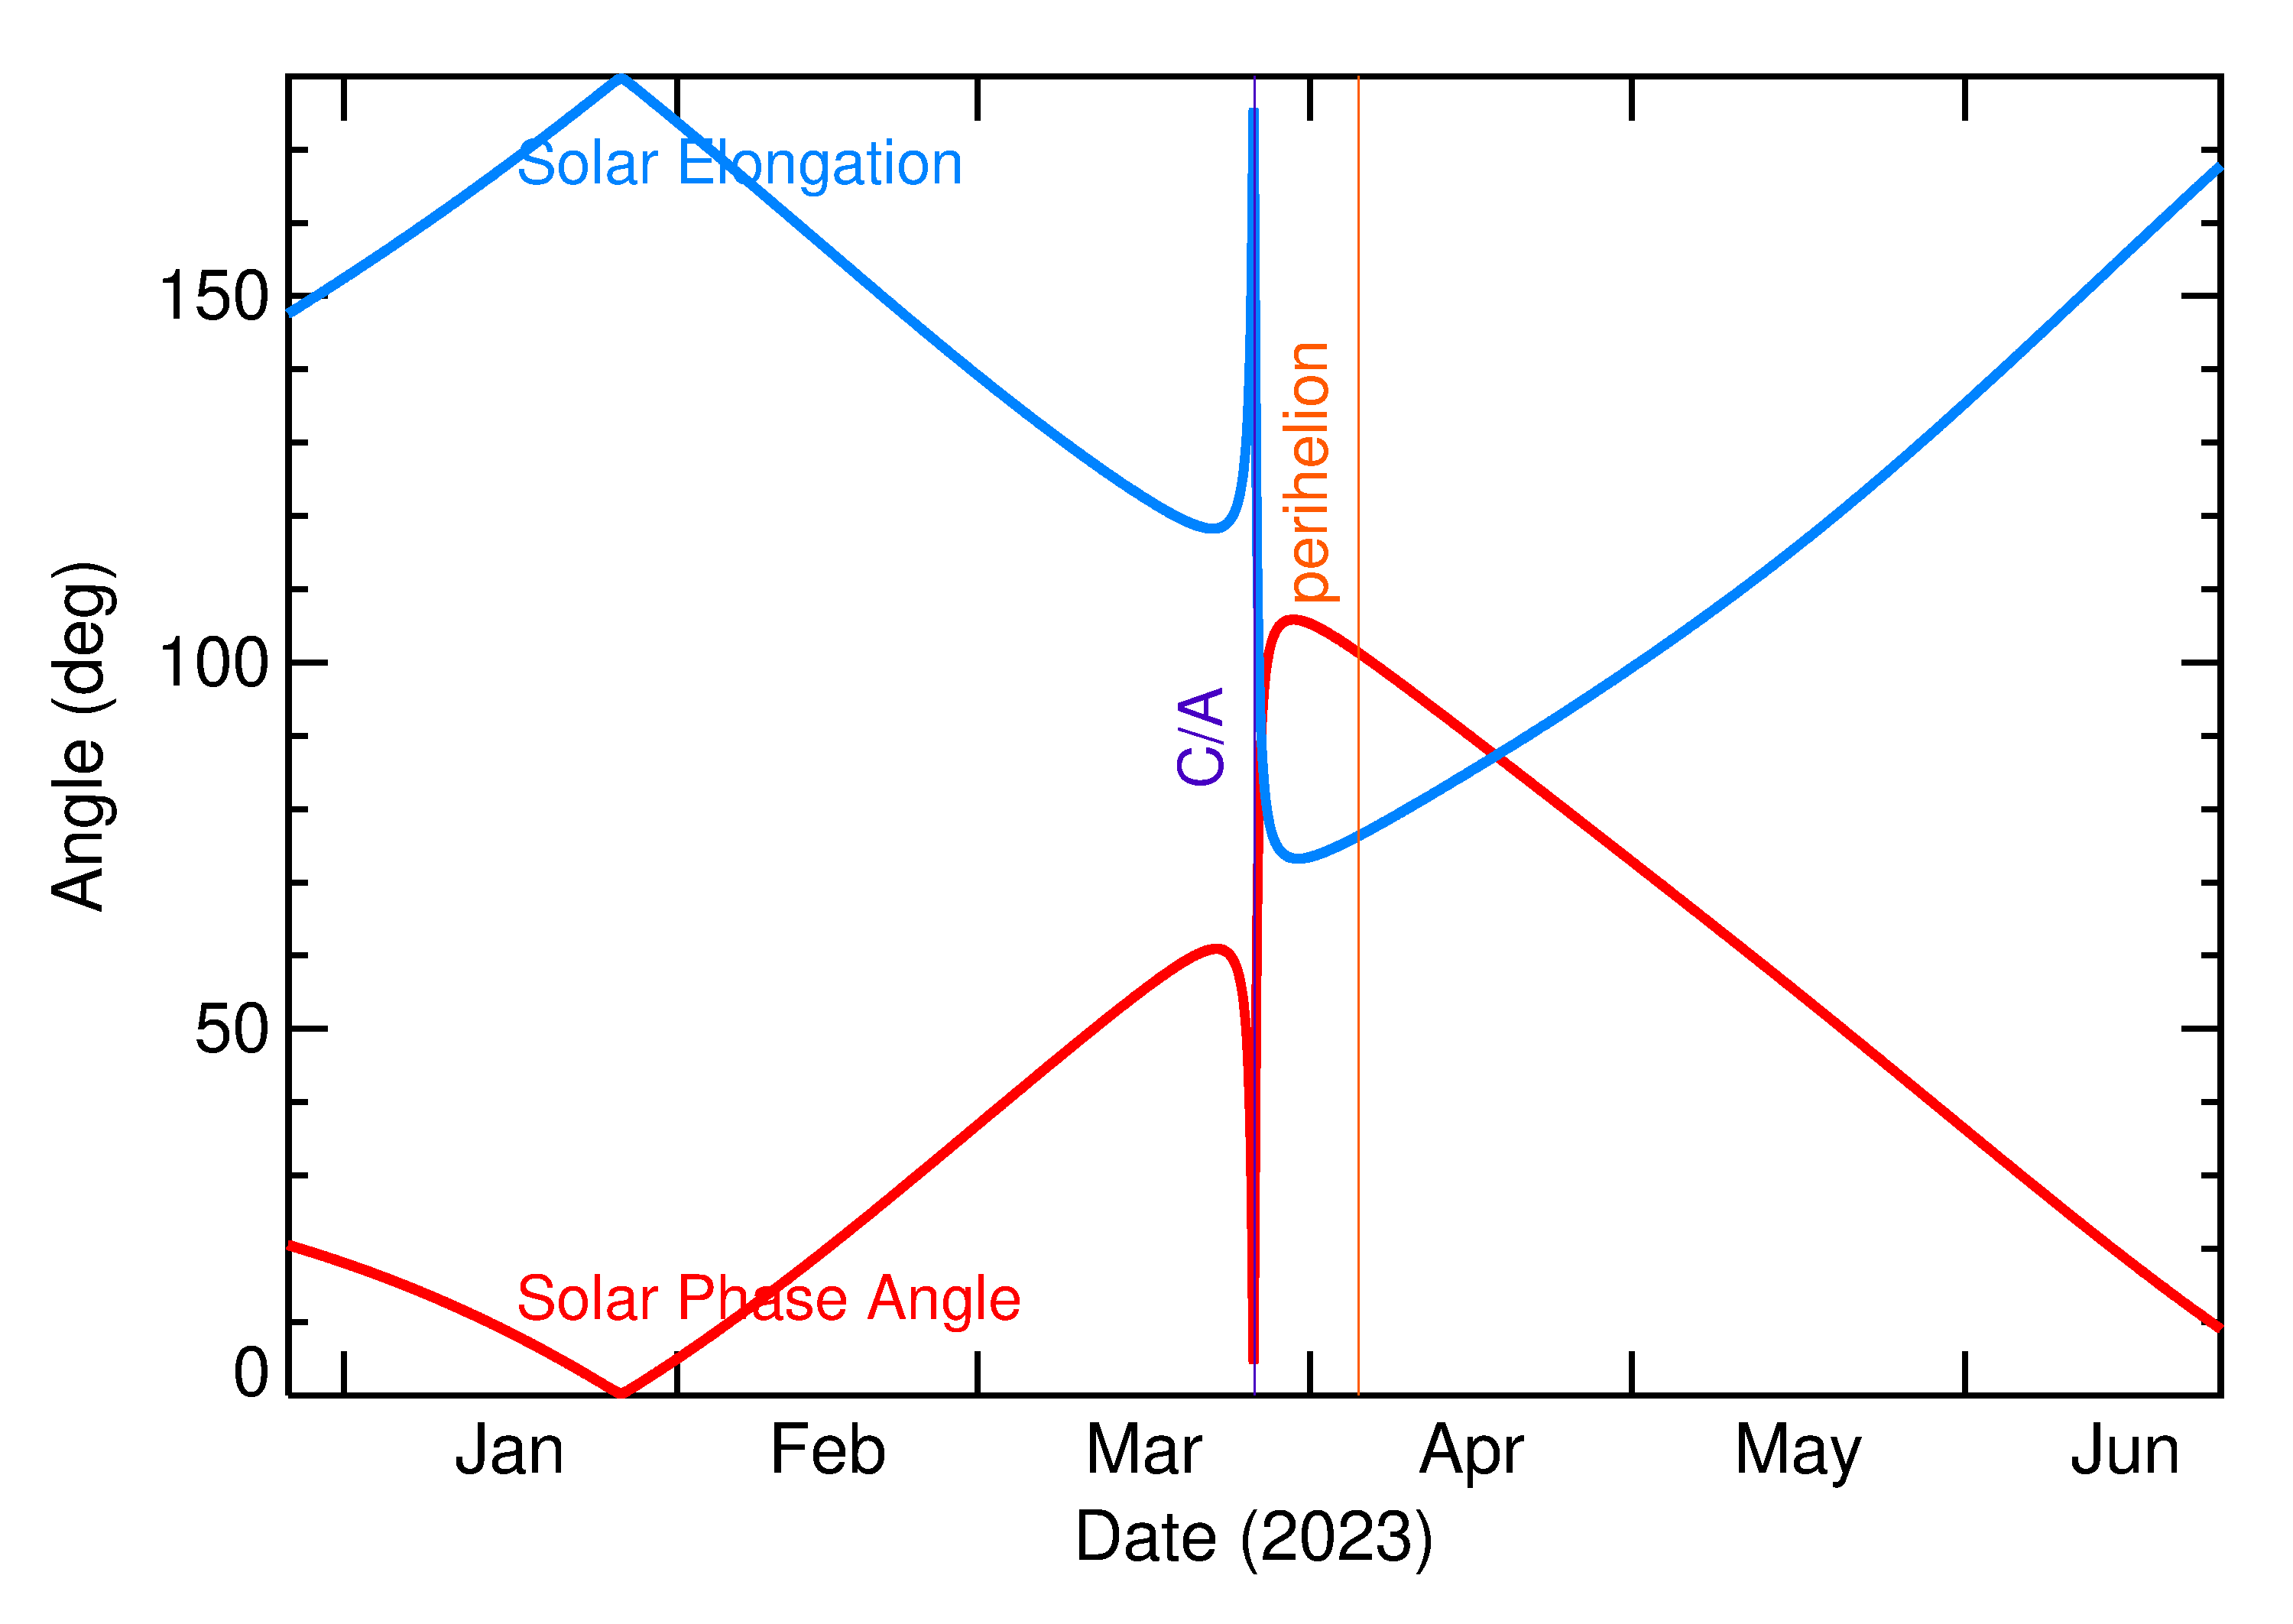 Solar Elongation and Solar Phase Angle of 2023 DZ2 in the months around closest approach